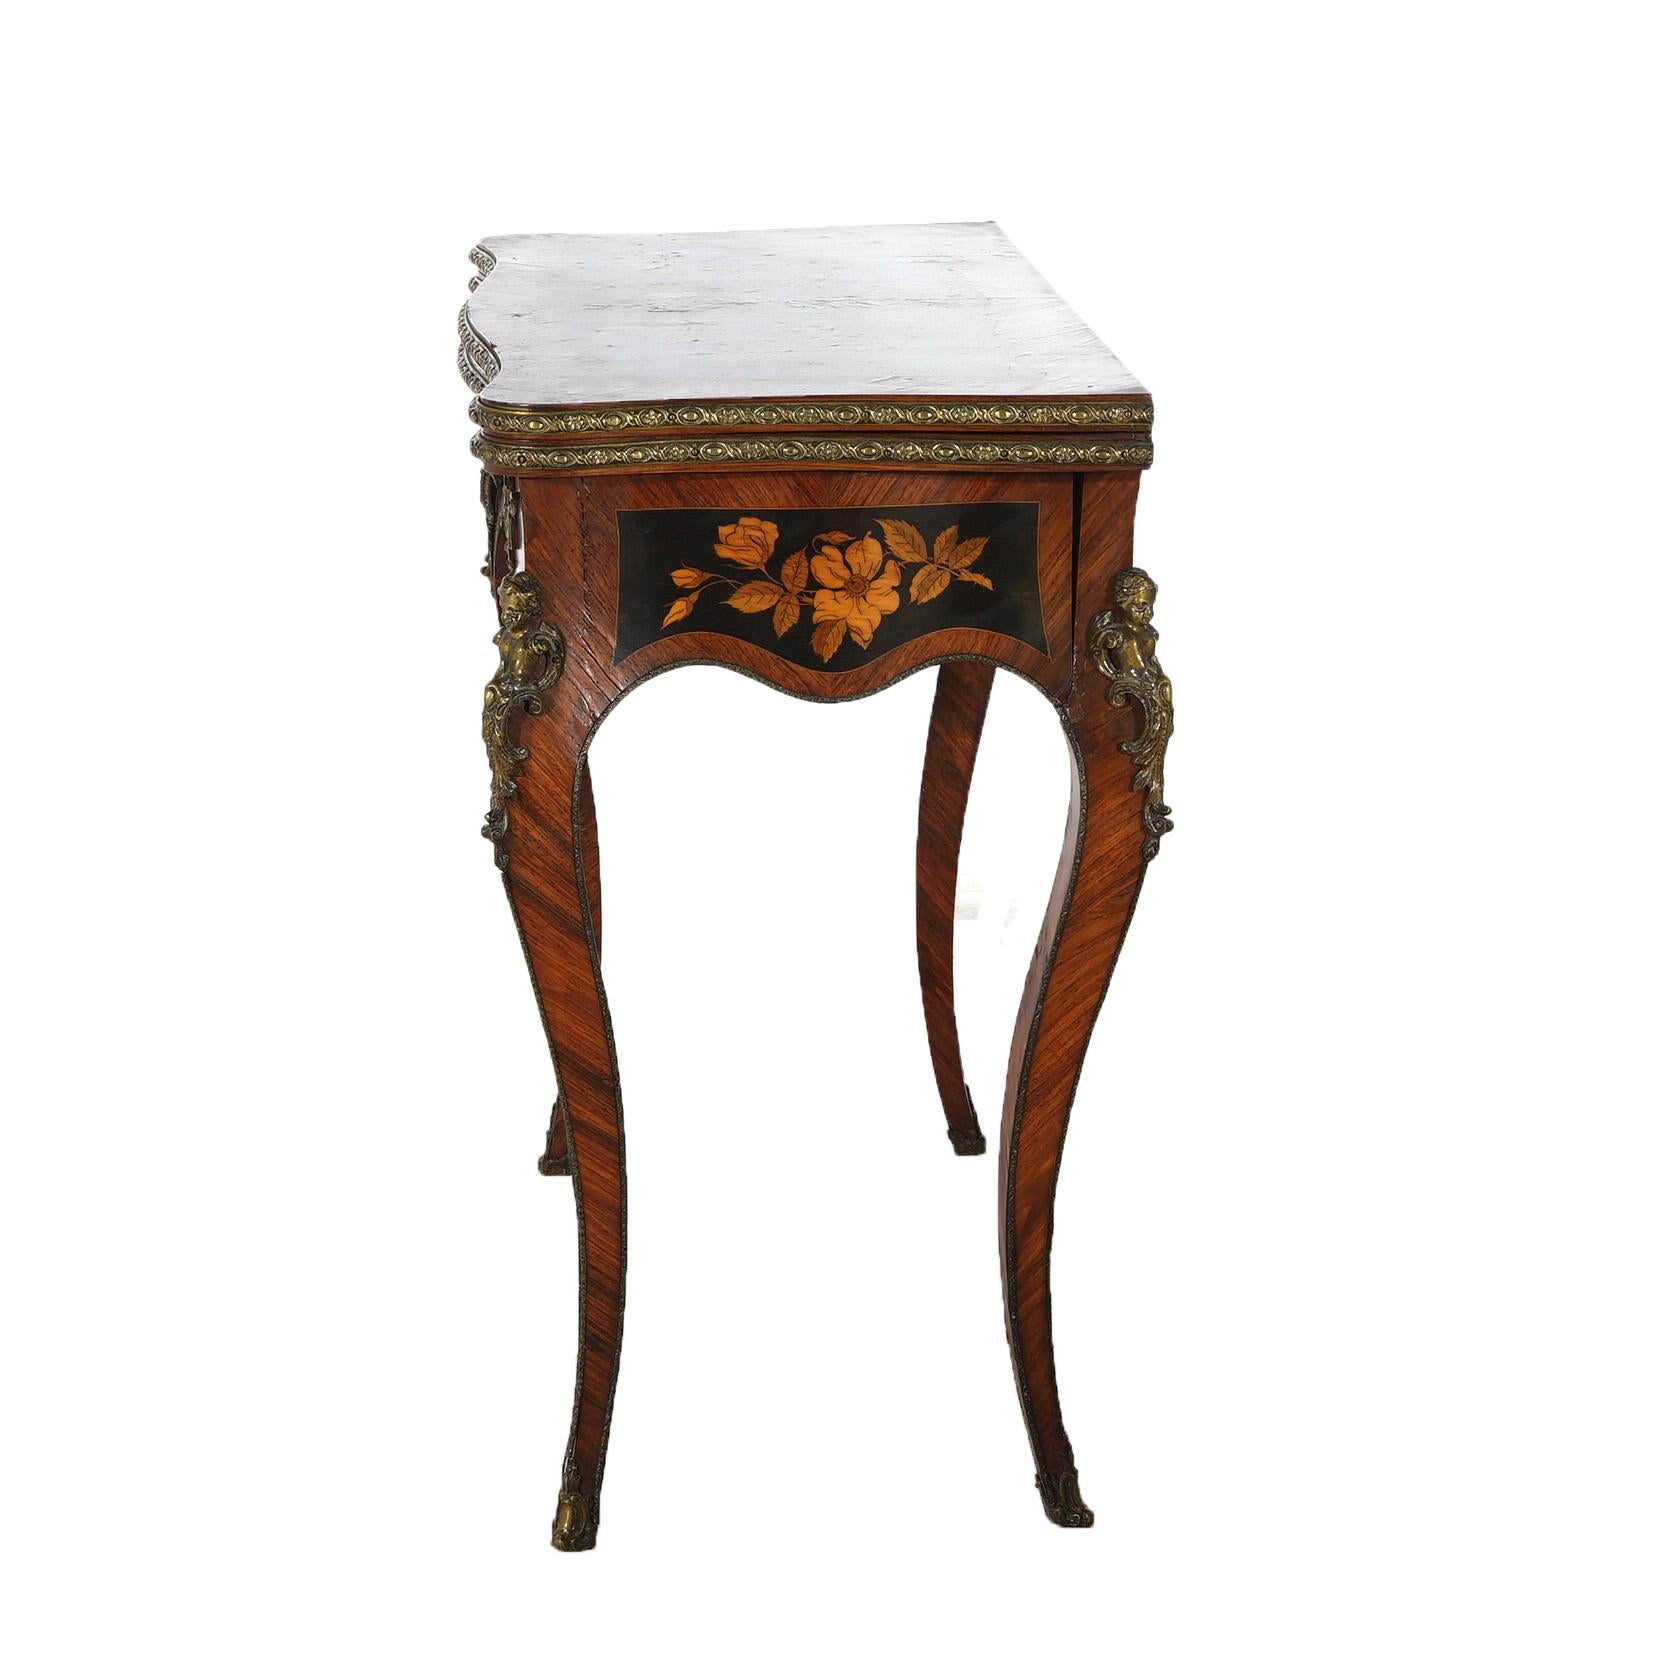 Ormolu Antique French Louis XIV Style Kingwood & Ebony Marquetry Inlay Card Table C1870 For Sale